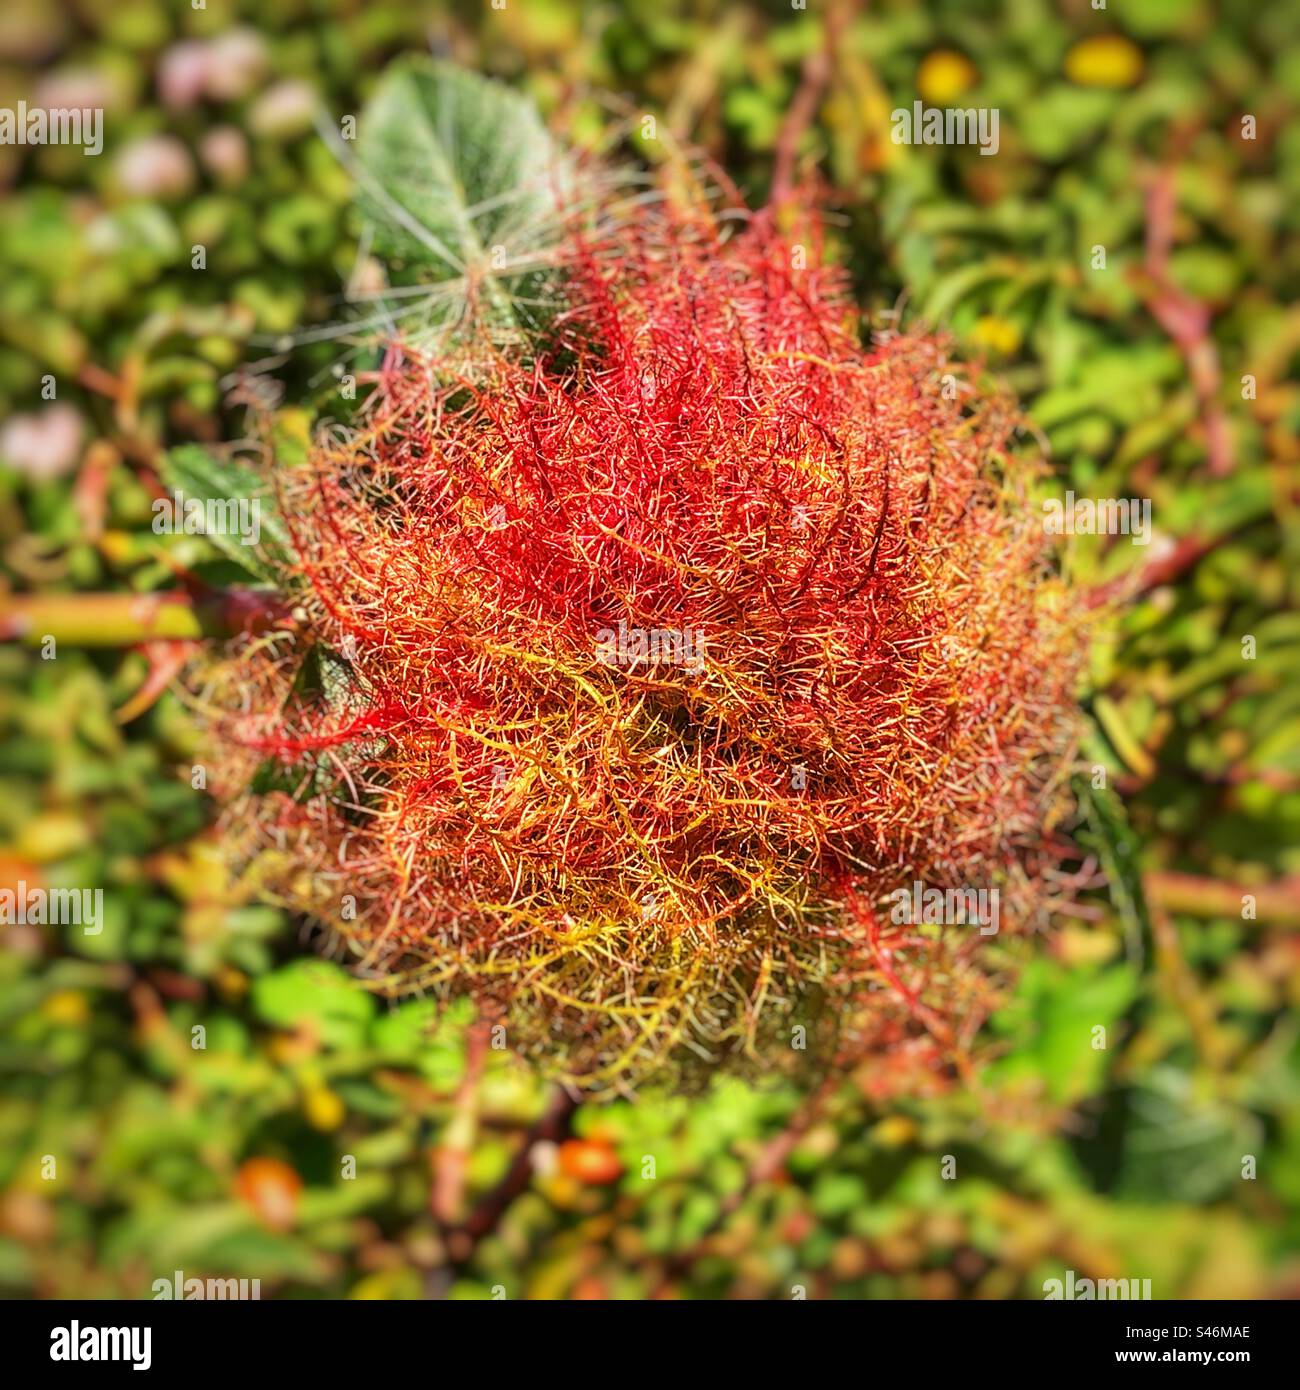 Rose Gall which is a chemically induced distortion of a dog rose, caused by a gall wasp. St Catherine's Hill Nature Reserve Hampshire, United Kingdom. Stock Photo